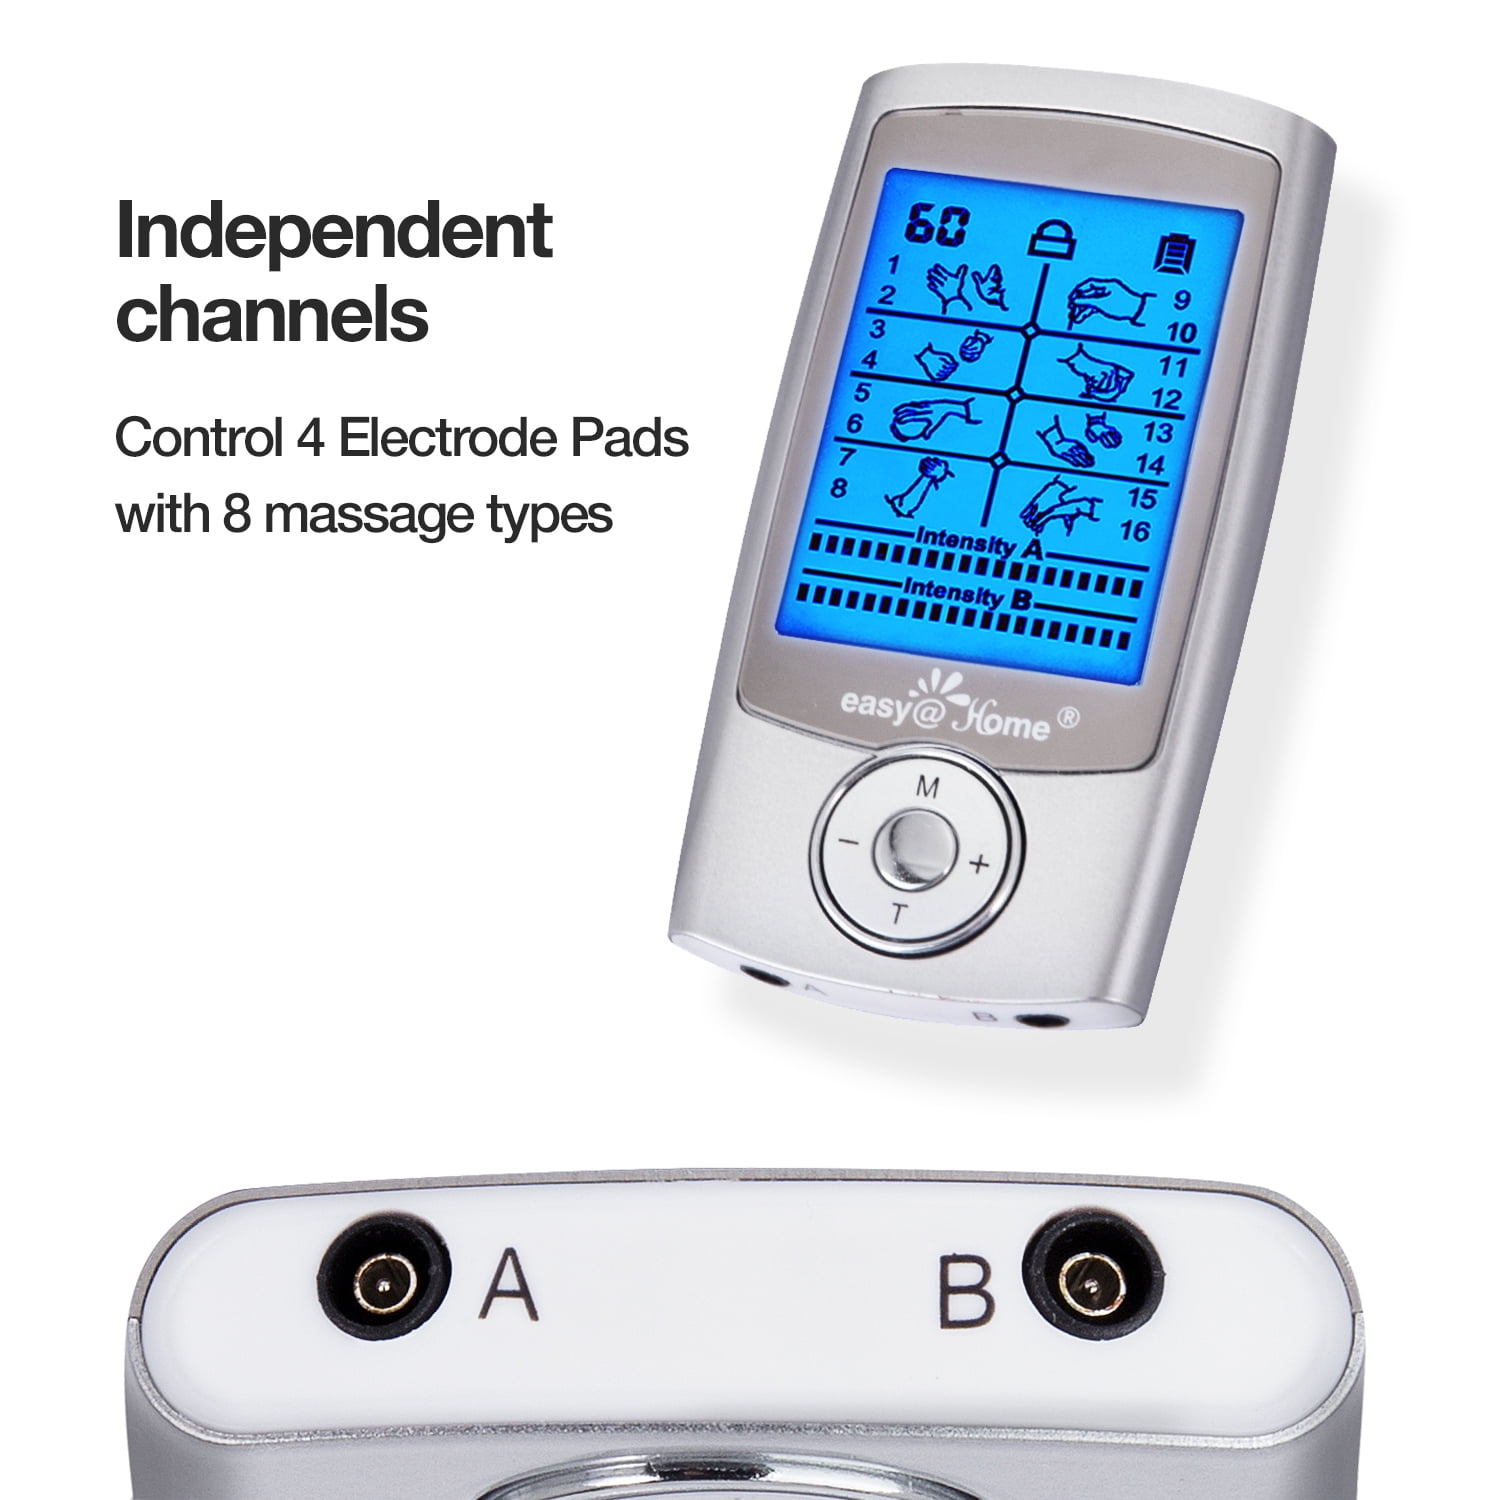 Easy@Home - EHE029N Rechargeable TENS Unit + EMS Muscle Stimulator 